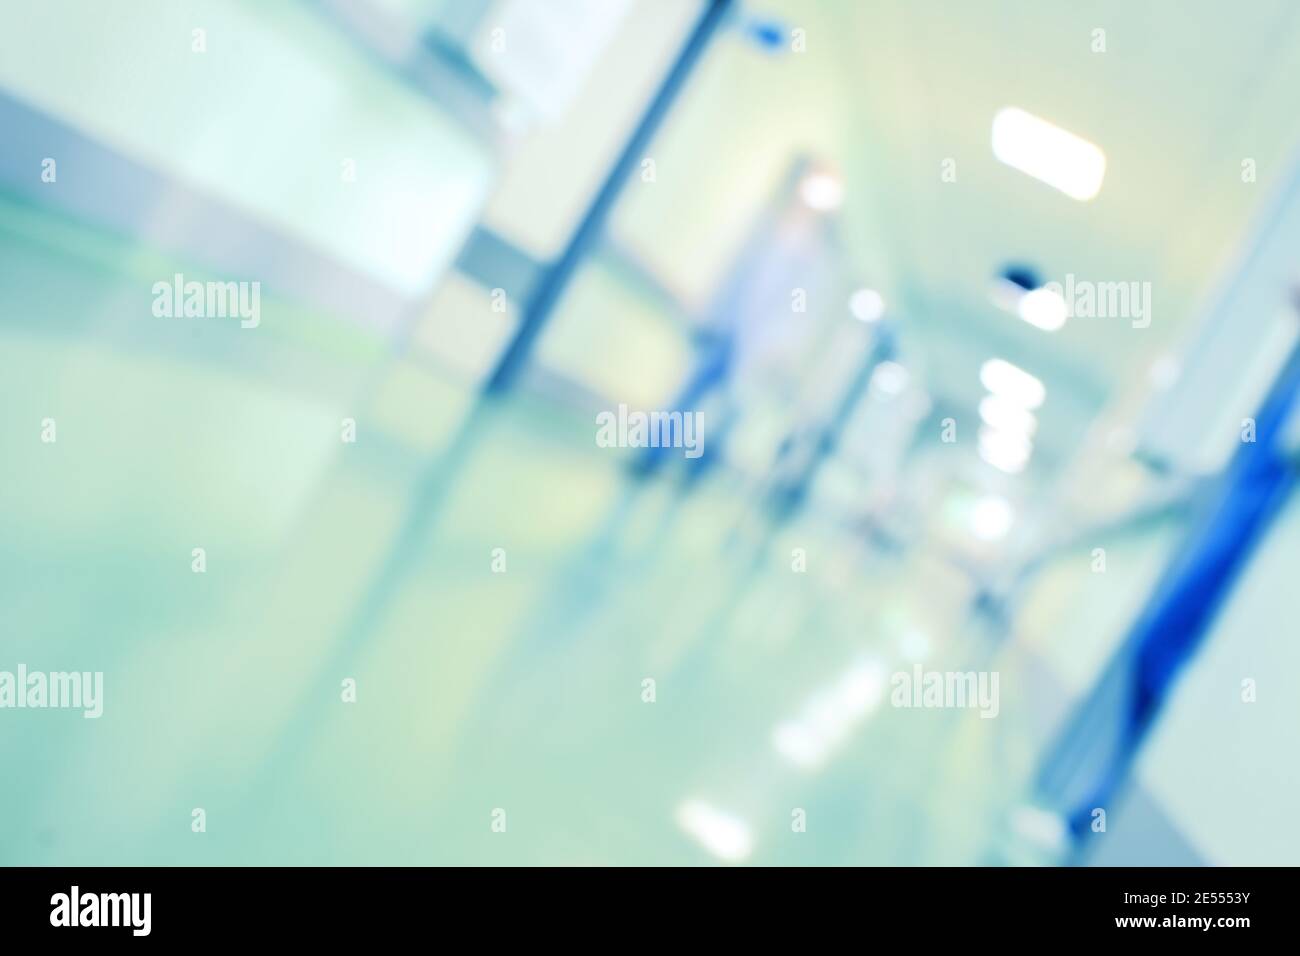 Blurred person in hospital hallway, unfocused background. Stock Photo